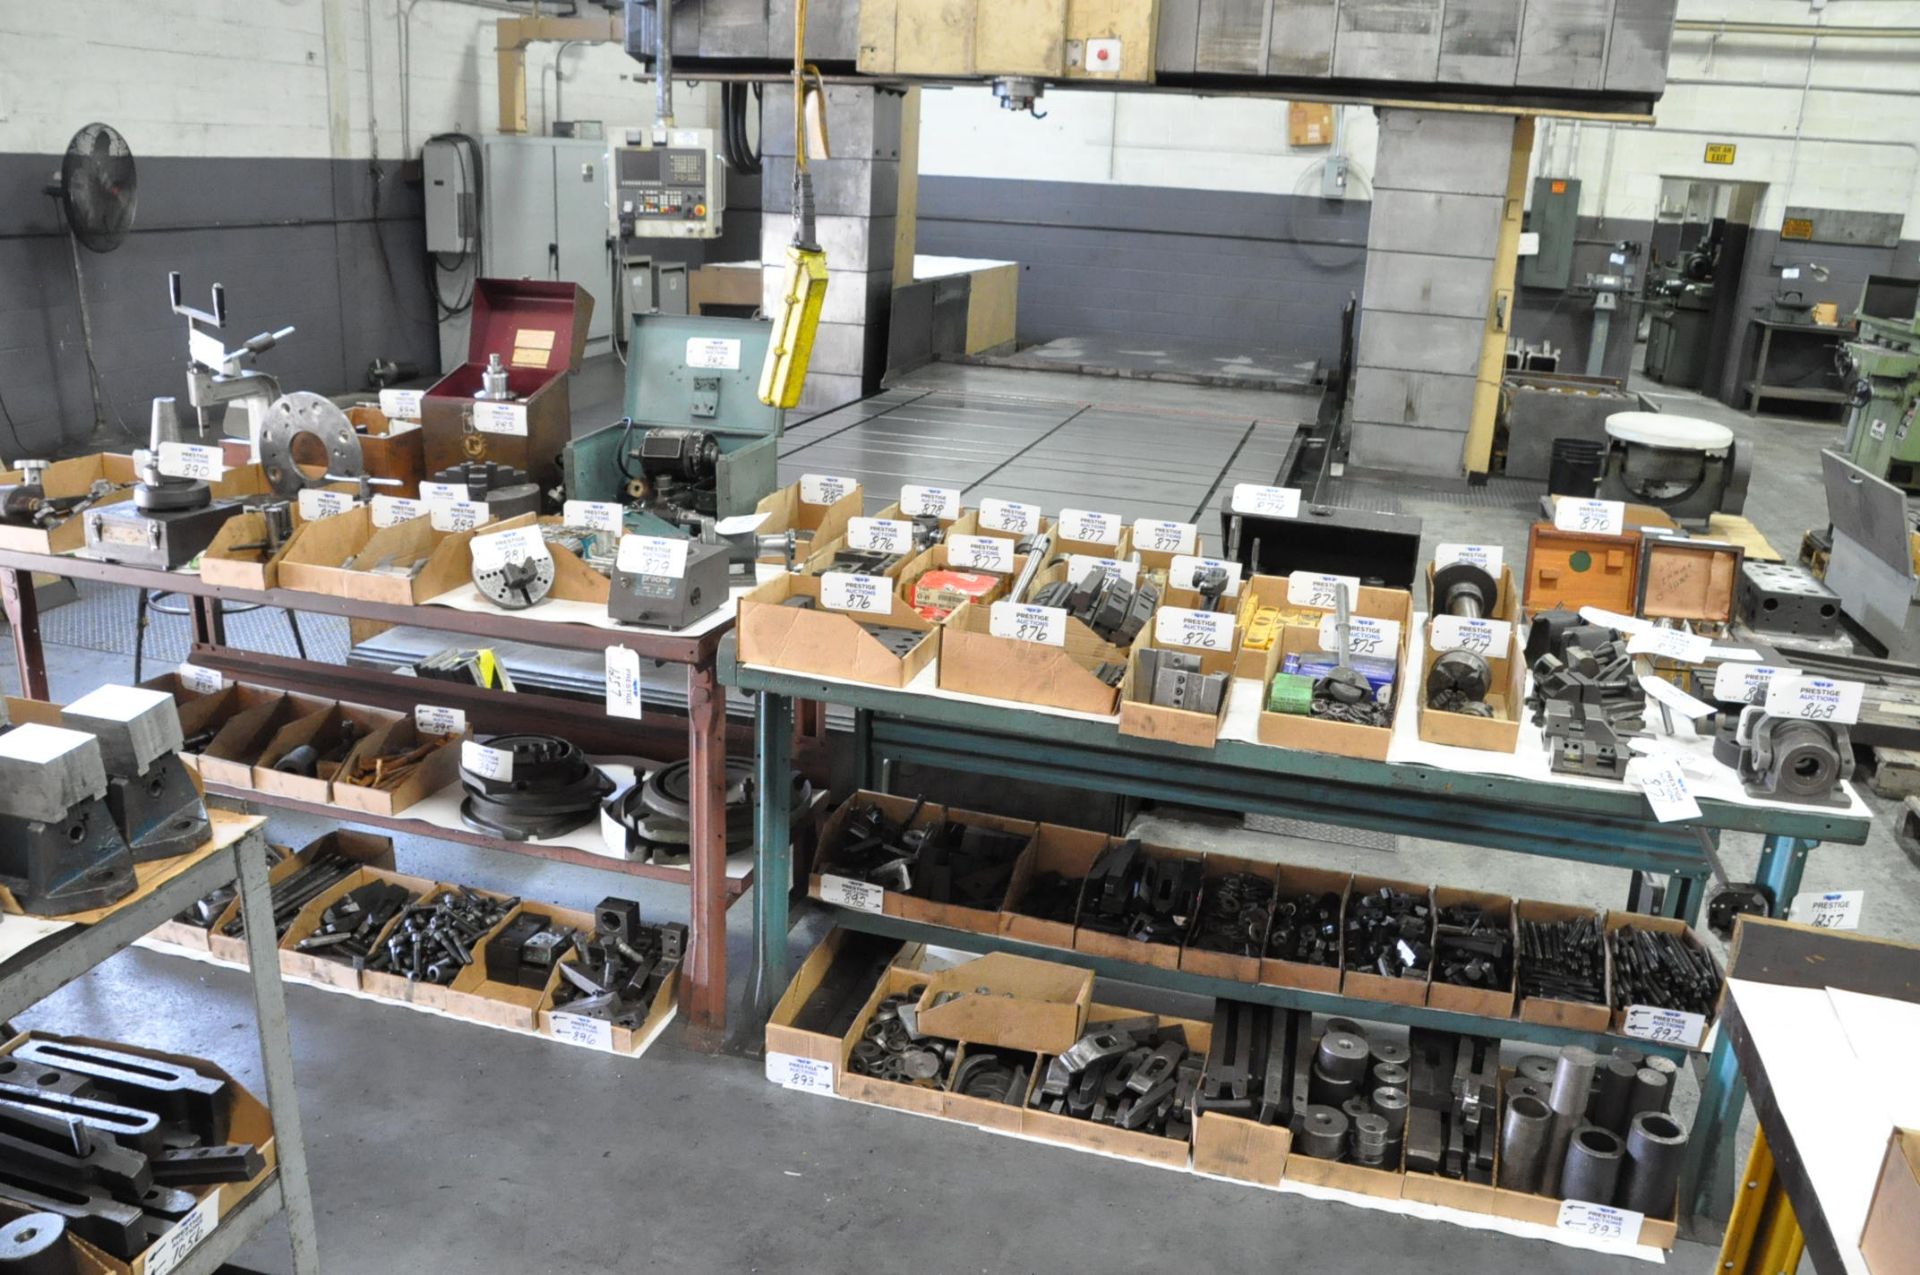 Lot-(6) Asst'd Work Benches in (1) Row, (Contents Not Included), (Not to Be Removed Until Empty), (B - Image 2 of 3